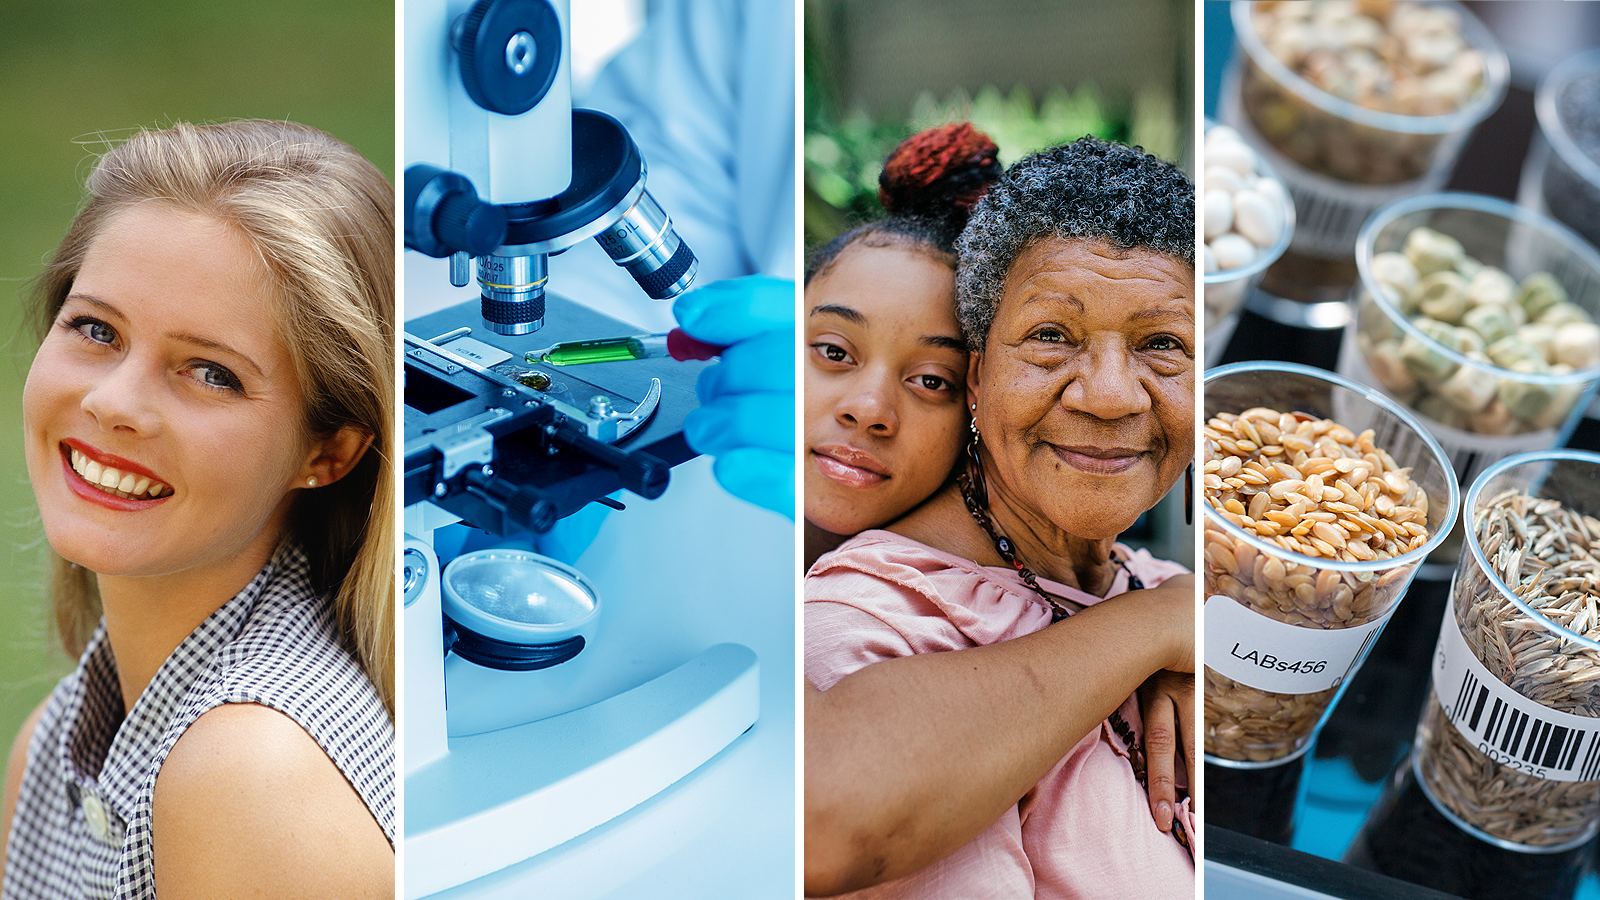 A collage of four images including a photo of a blonde woman, a scientist using a microscope, an African-American elderly woman with a young girl, and cups filled with samples of seeds and cereals